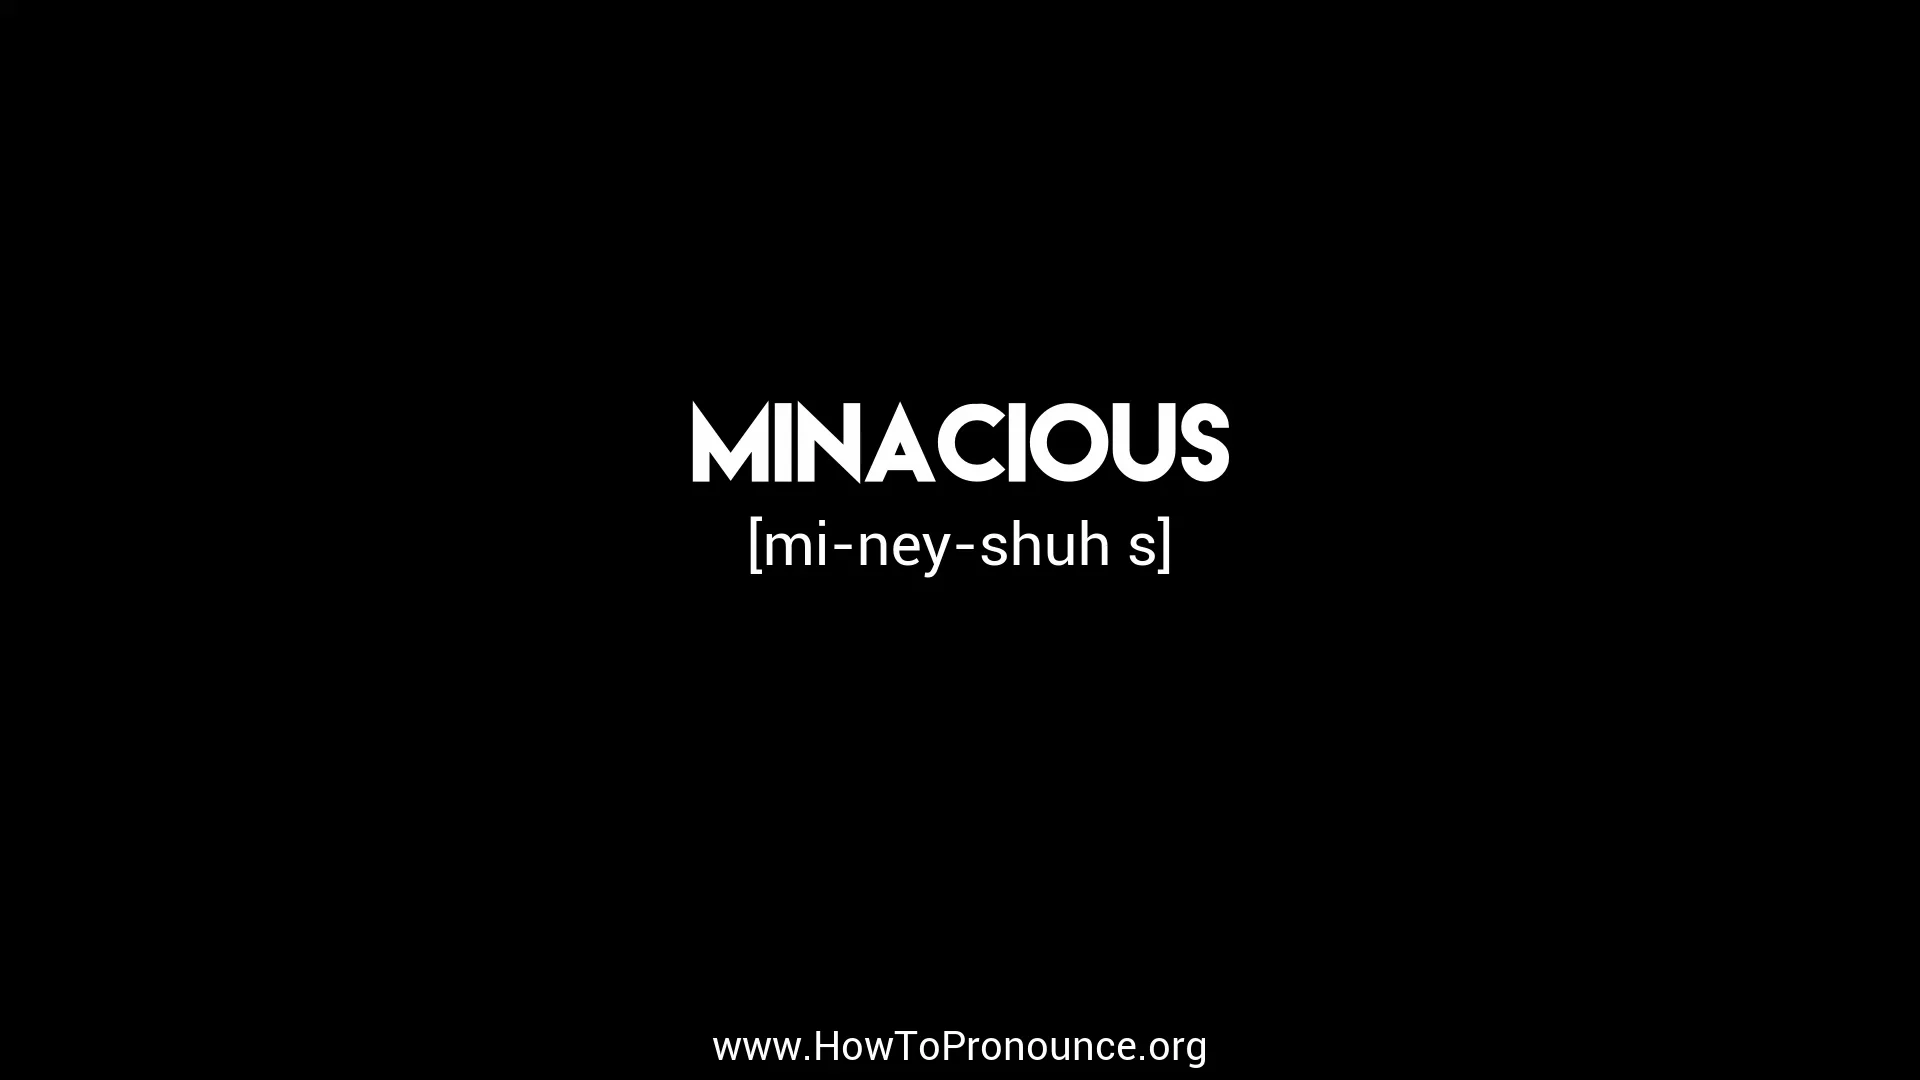 minacious - definition of minacious in English from the Oxford dictionary